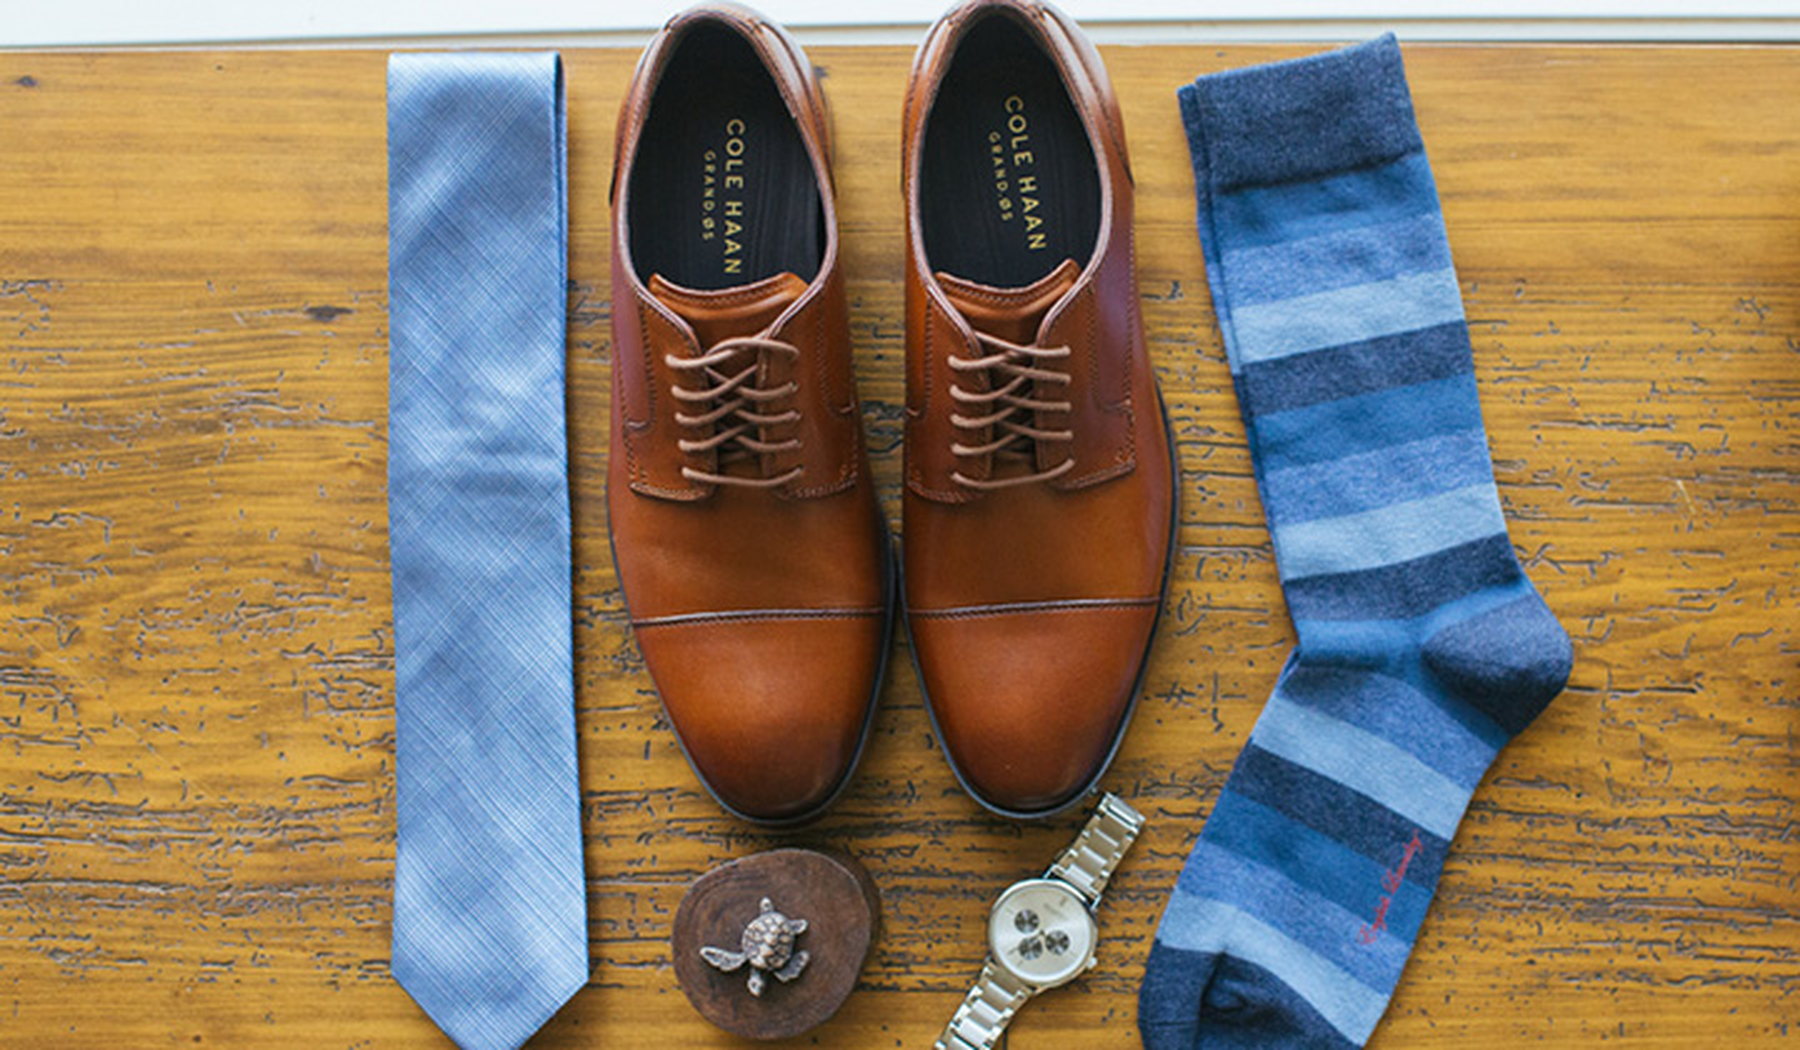 Cole Haan shoes sitting by a blue tie, blue striped socks, and a watch